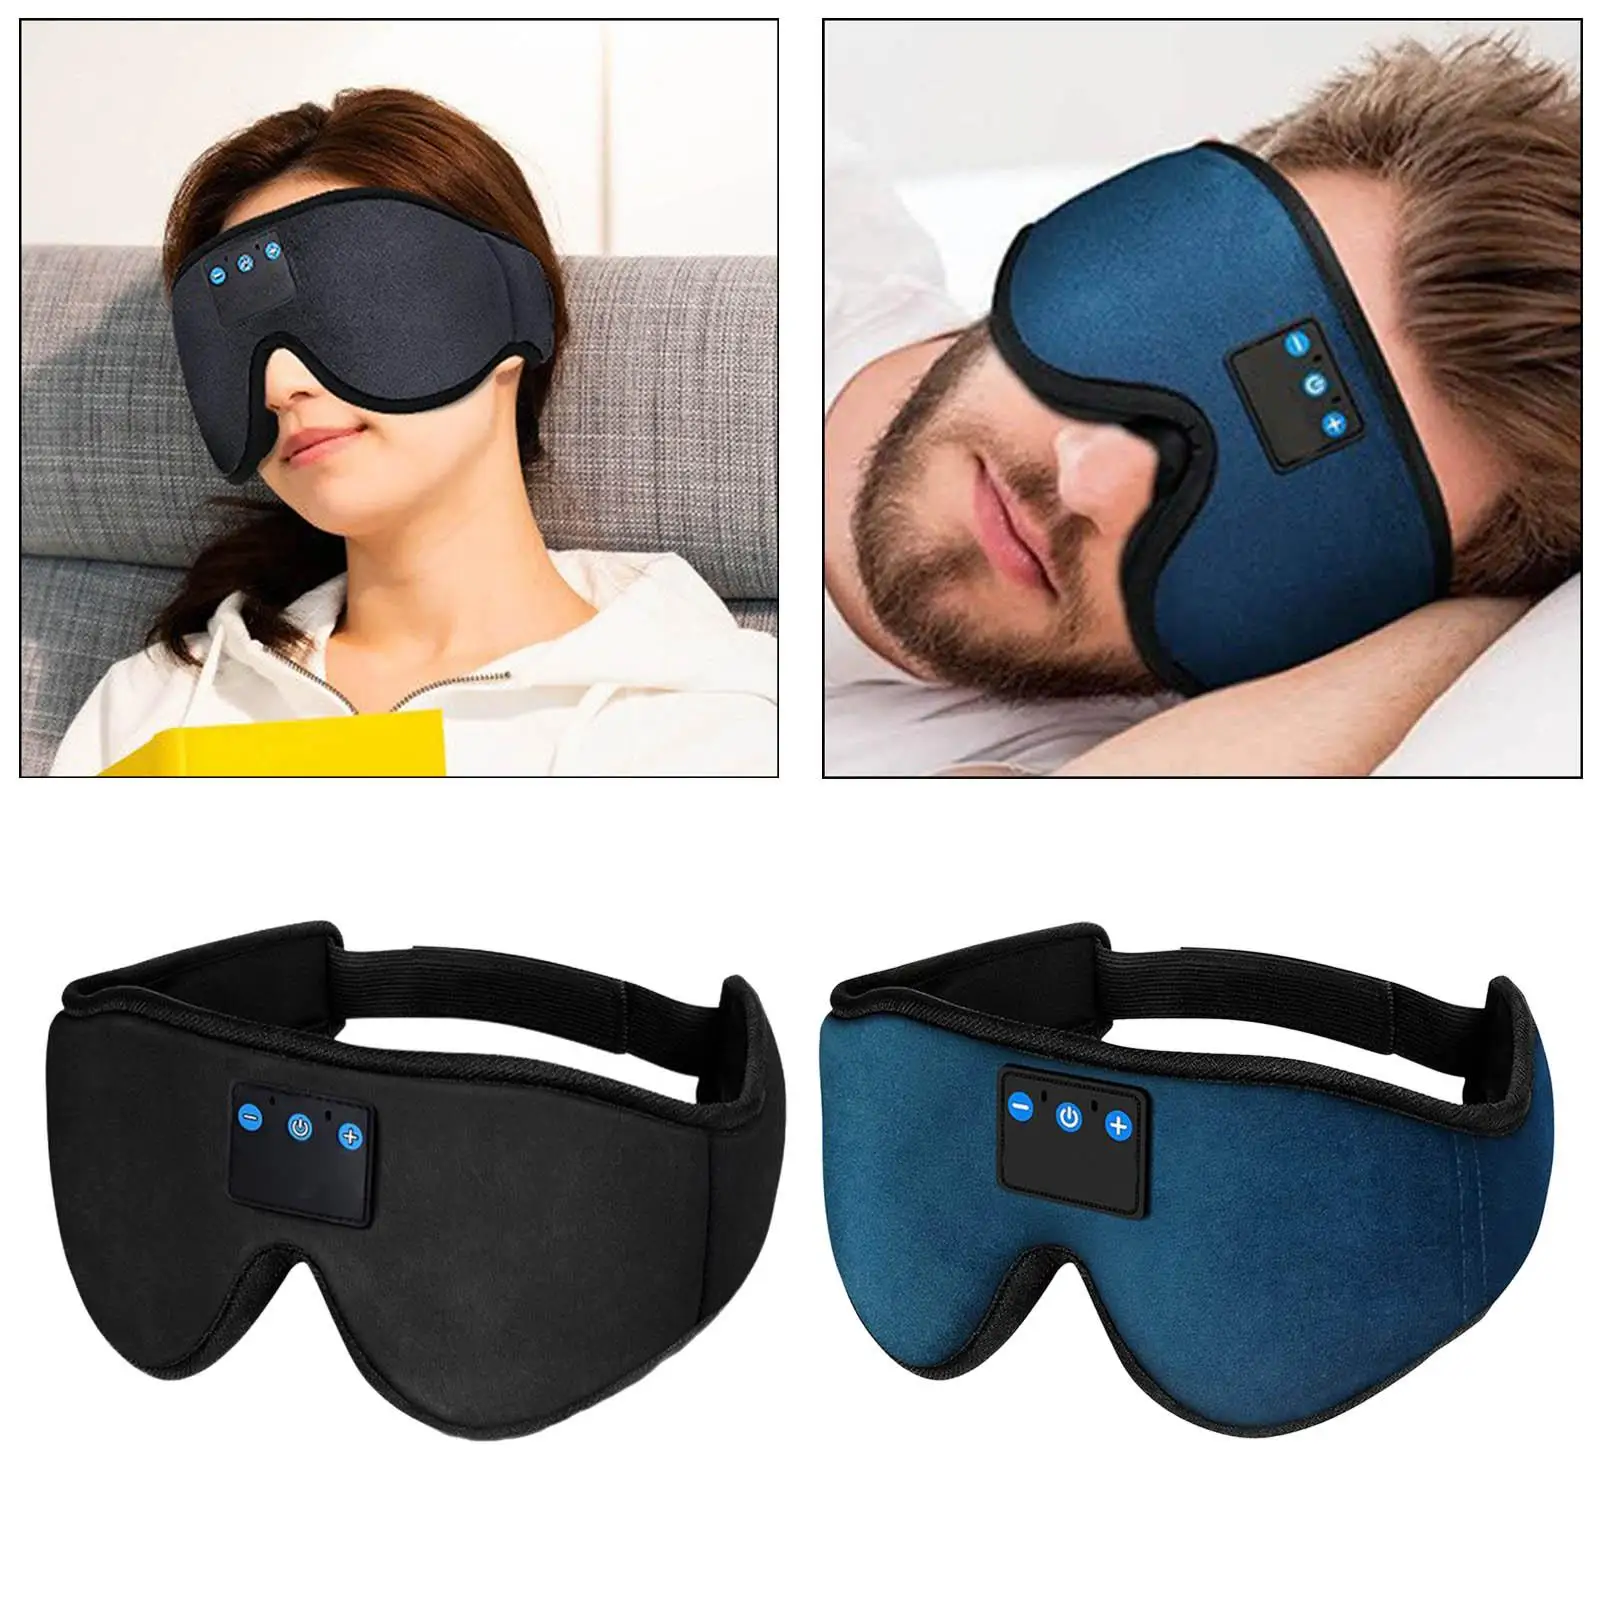 Bluetooth 5.2 Sleep Headphones Breathable Broadcasting 3D Sleep Mask for Home Office Day and Night Gym Air Travel Men Women